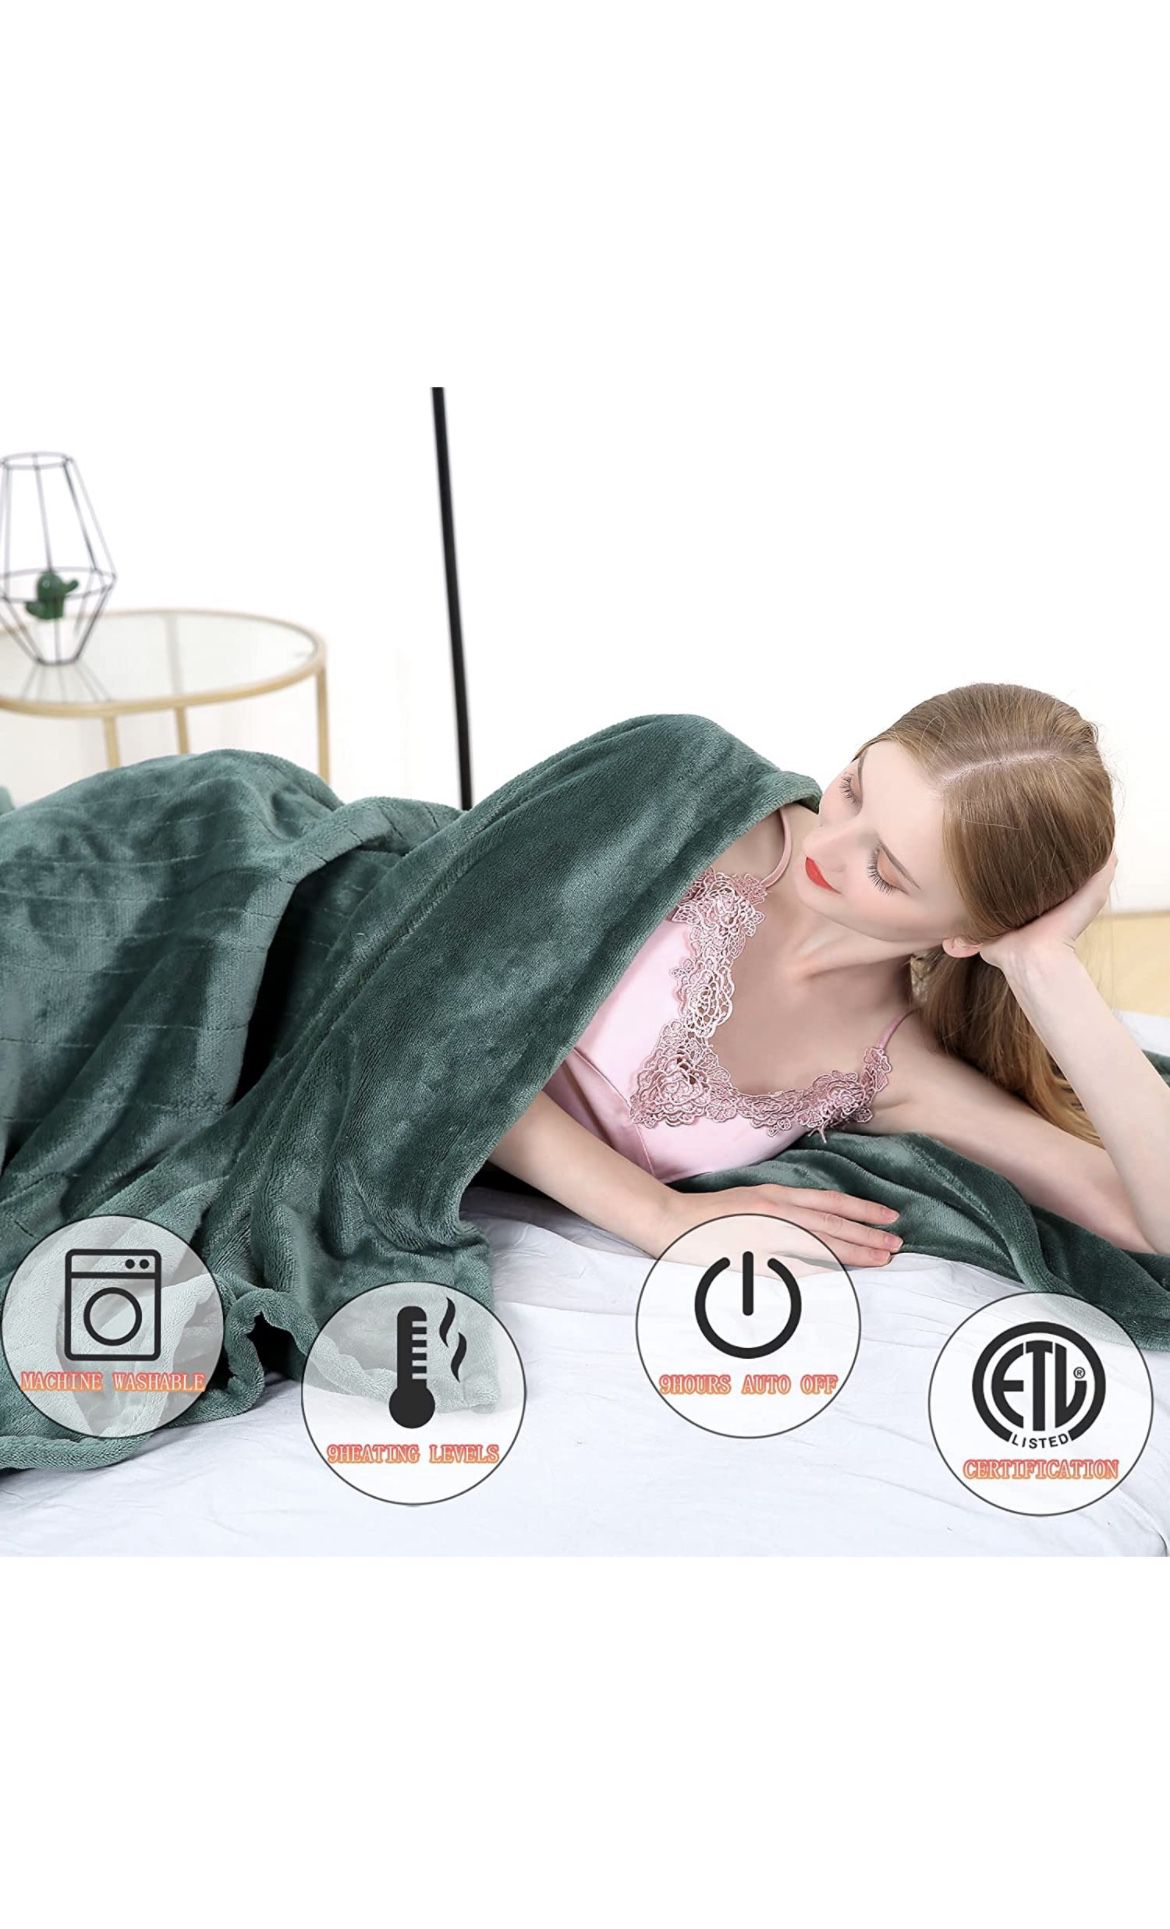 Heated Blanket 74”x84”Full Size Electric Blanket Throws Fast Heating 9 Heating Levels 9 Hours Auto Off Full Body Warming ETL Certified Machine Washabl